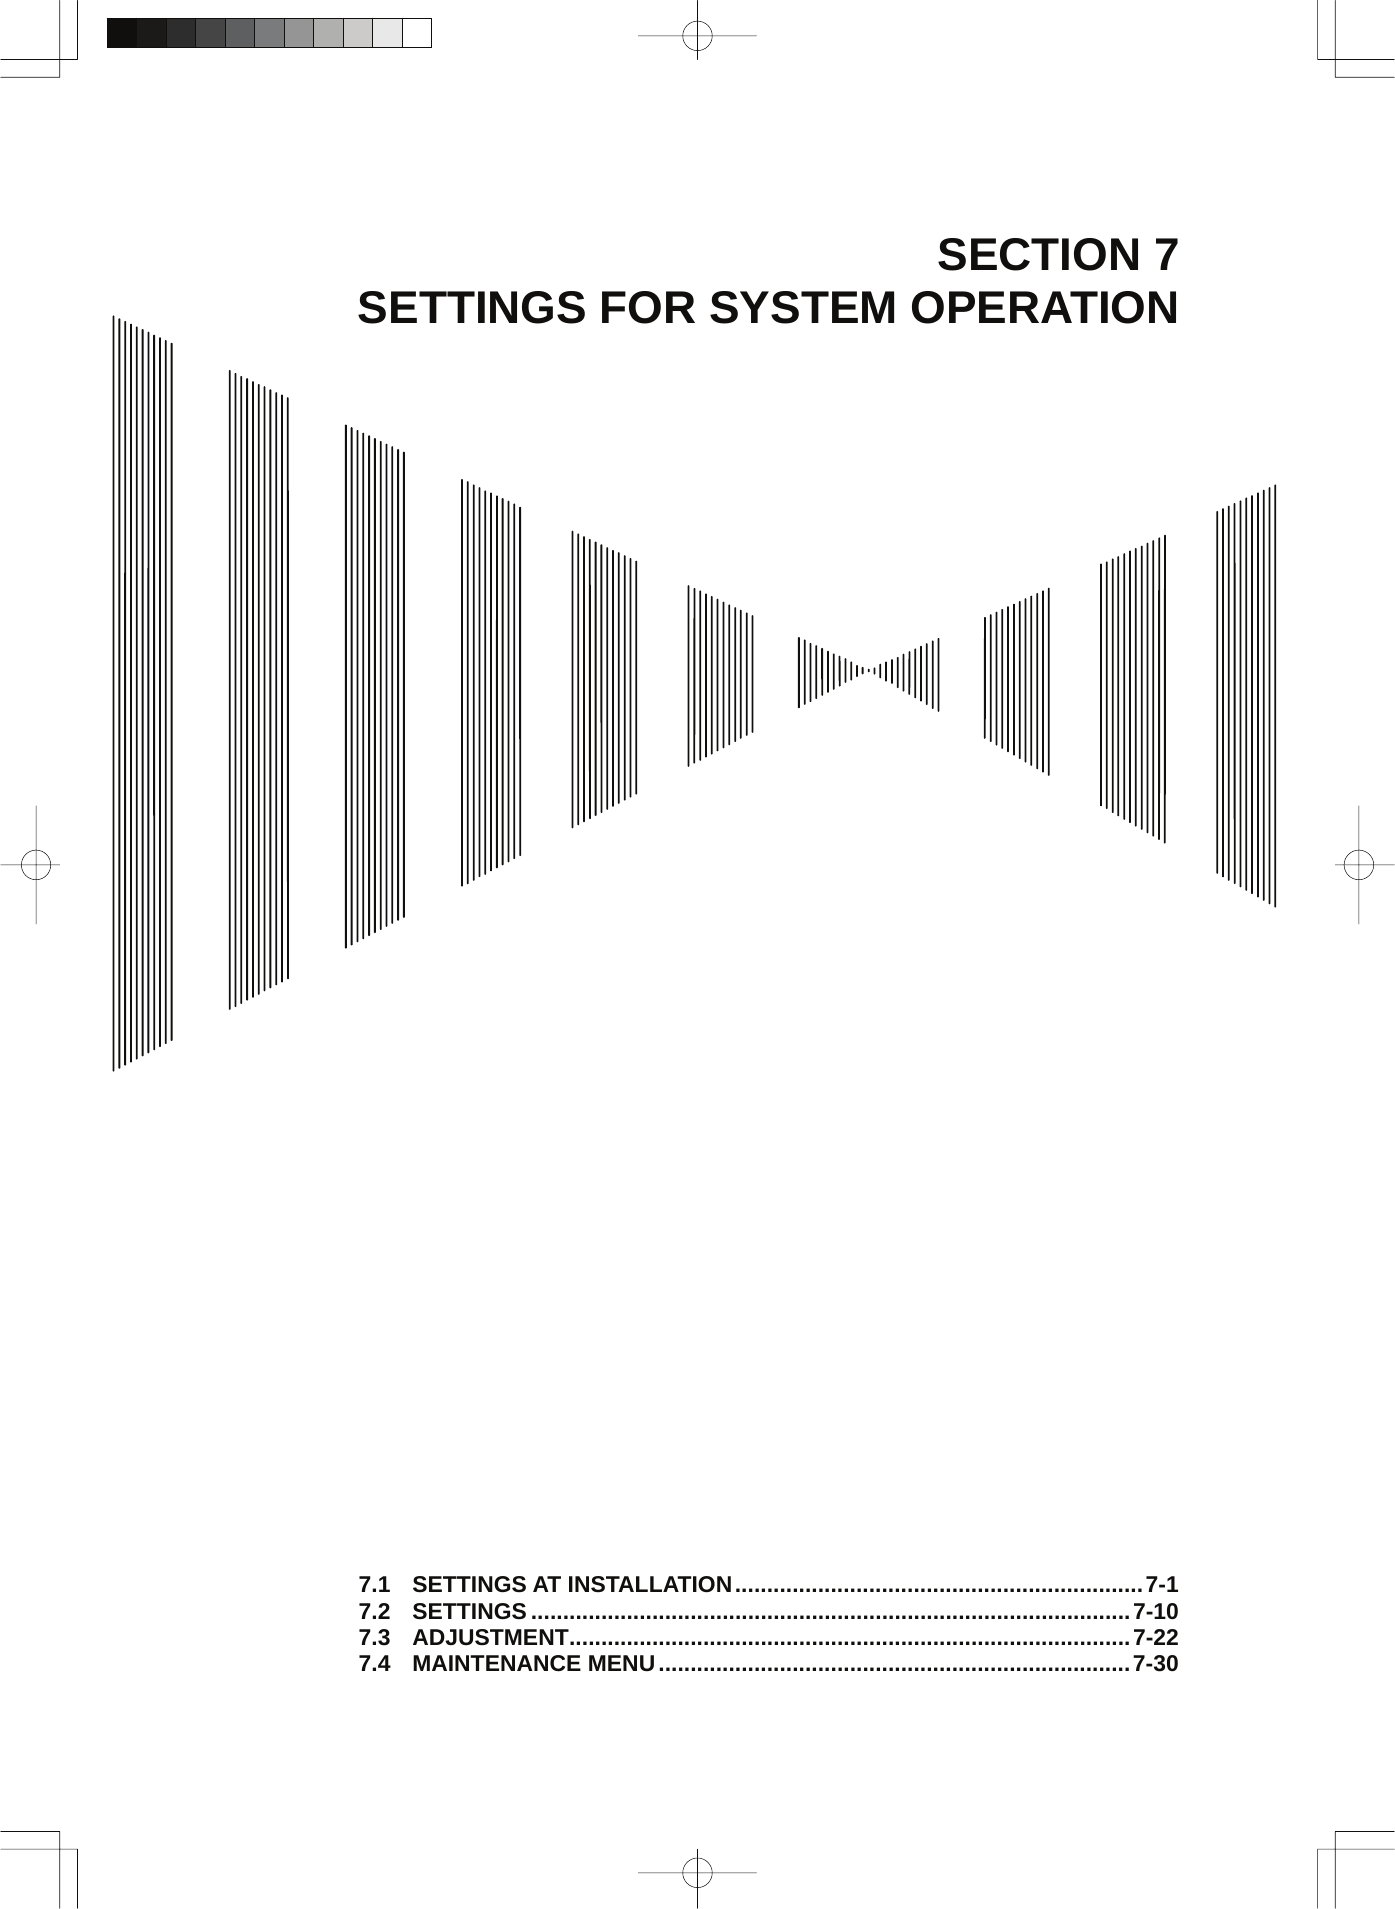  SECTION 7 SETTINGS FOR SYSTEM OPERATION                                              7.1 SETTINGS AT INSTALLATION................................................................7-1 7.2 SETTINGS ..............................................................................................7-10 7.3 ADJUSTMENT........................................................................................7-22 7.4 MAINTENANCE MENU..........................................................................7-30 